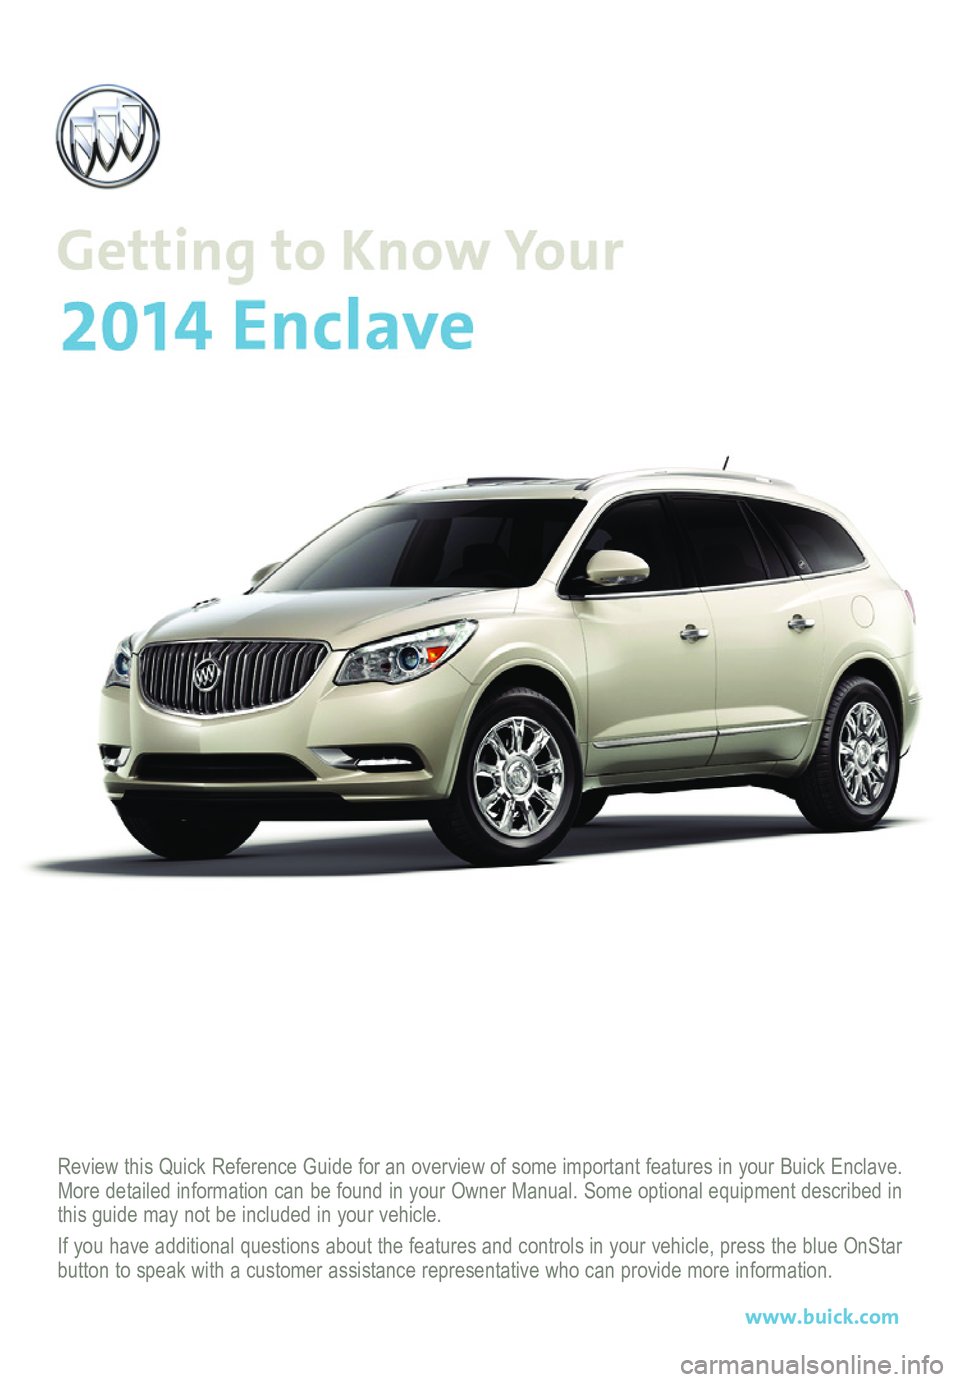 BUICK ENCLAVE 2014  Get To Know Guide Review this Quick Reference Guide for an overview of some important features in your Buick Enclave. More detailed information can be found in your Owner Manual. Some option\
al equipment described in 